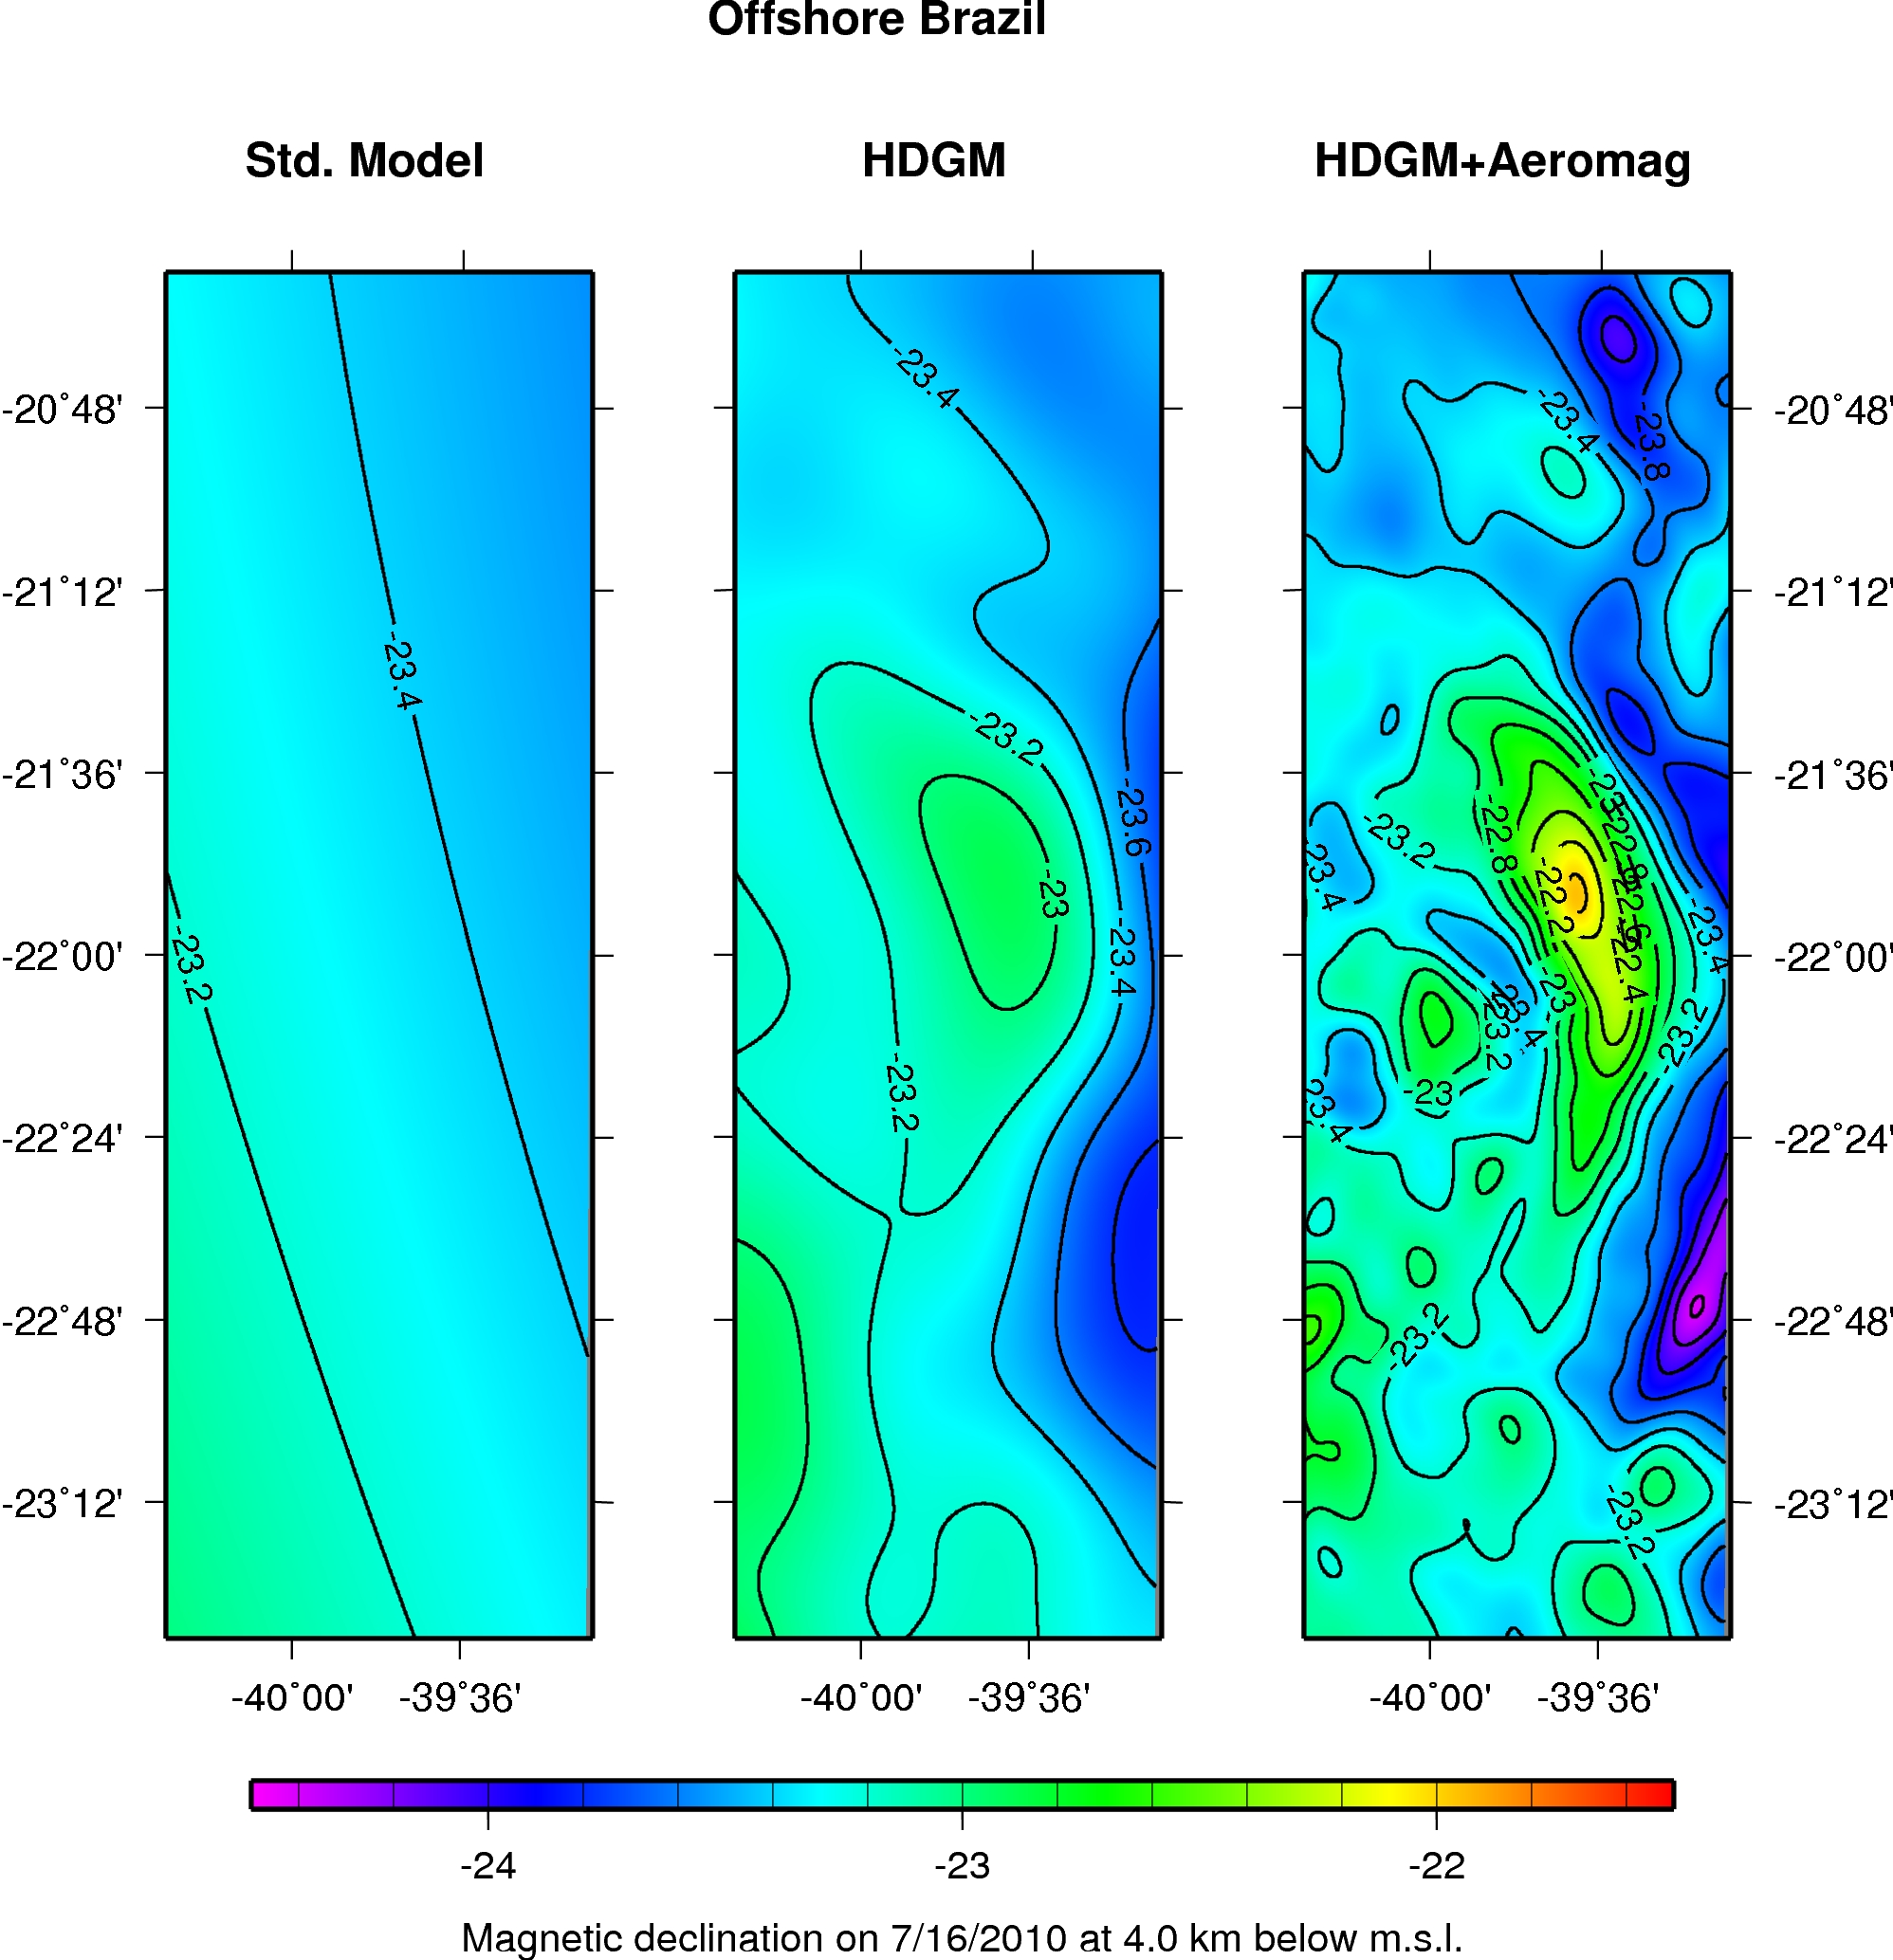 Declination contour maps that compare HDGM to global magnetic field models